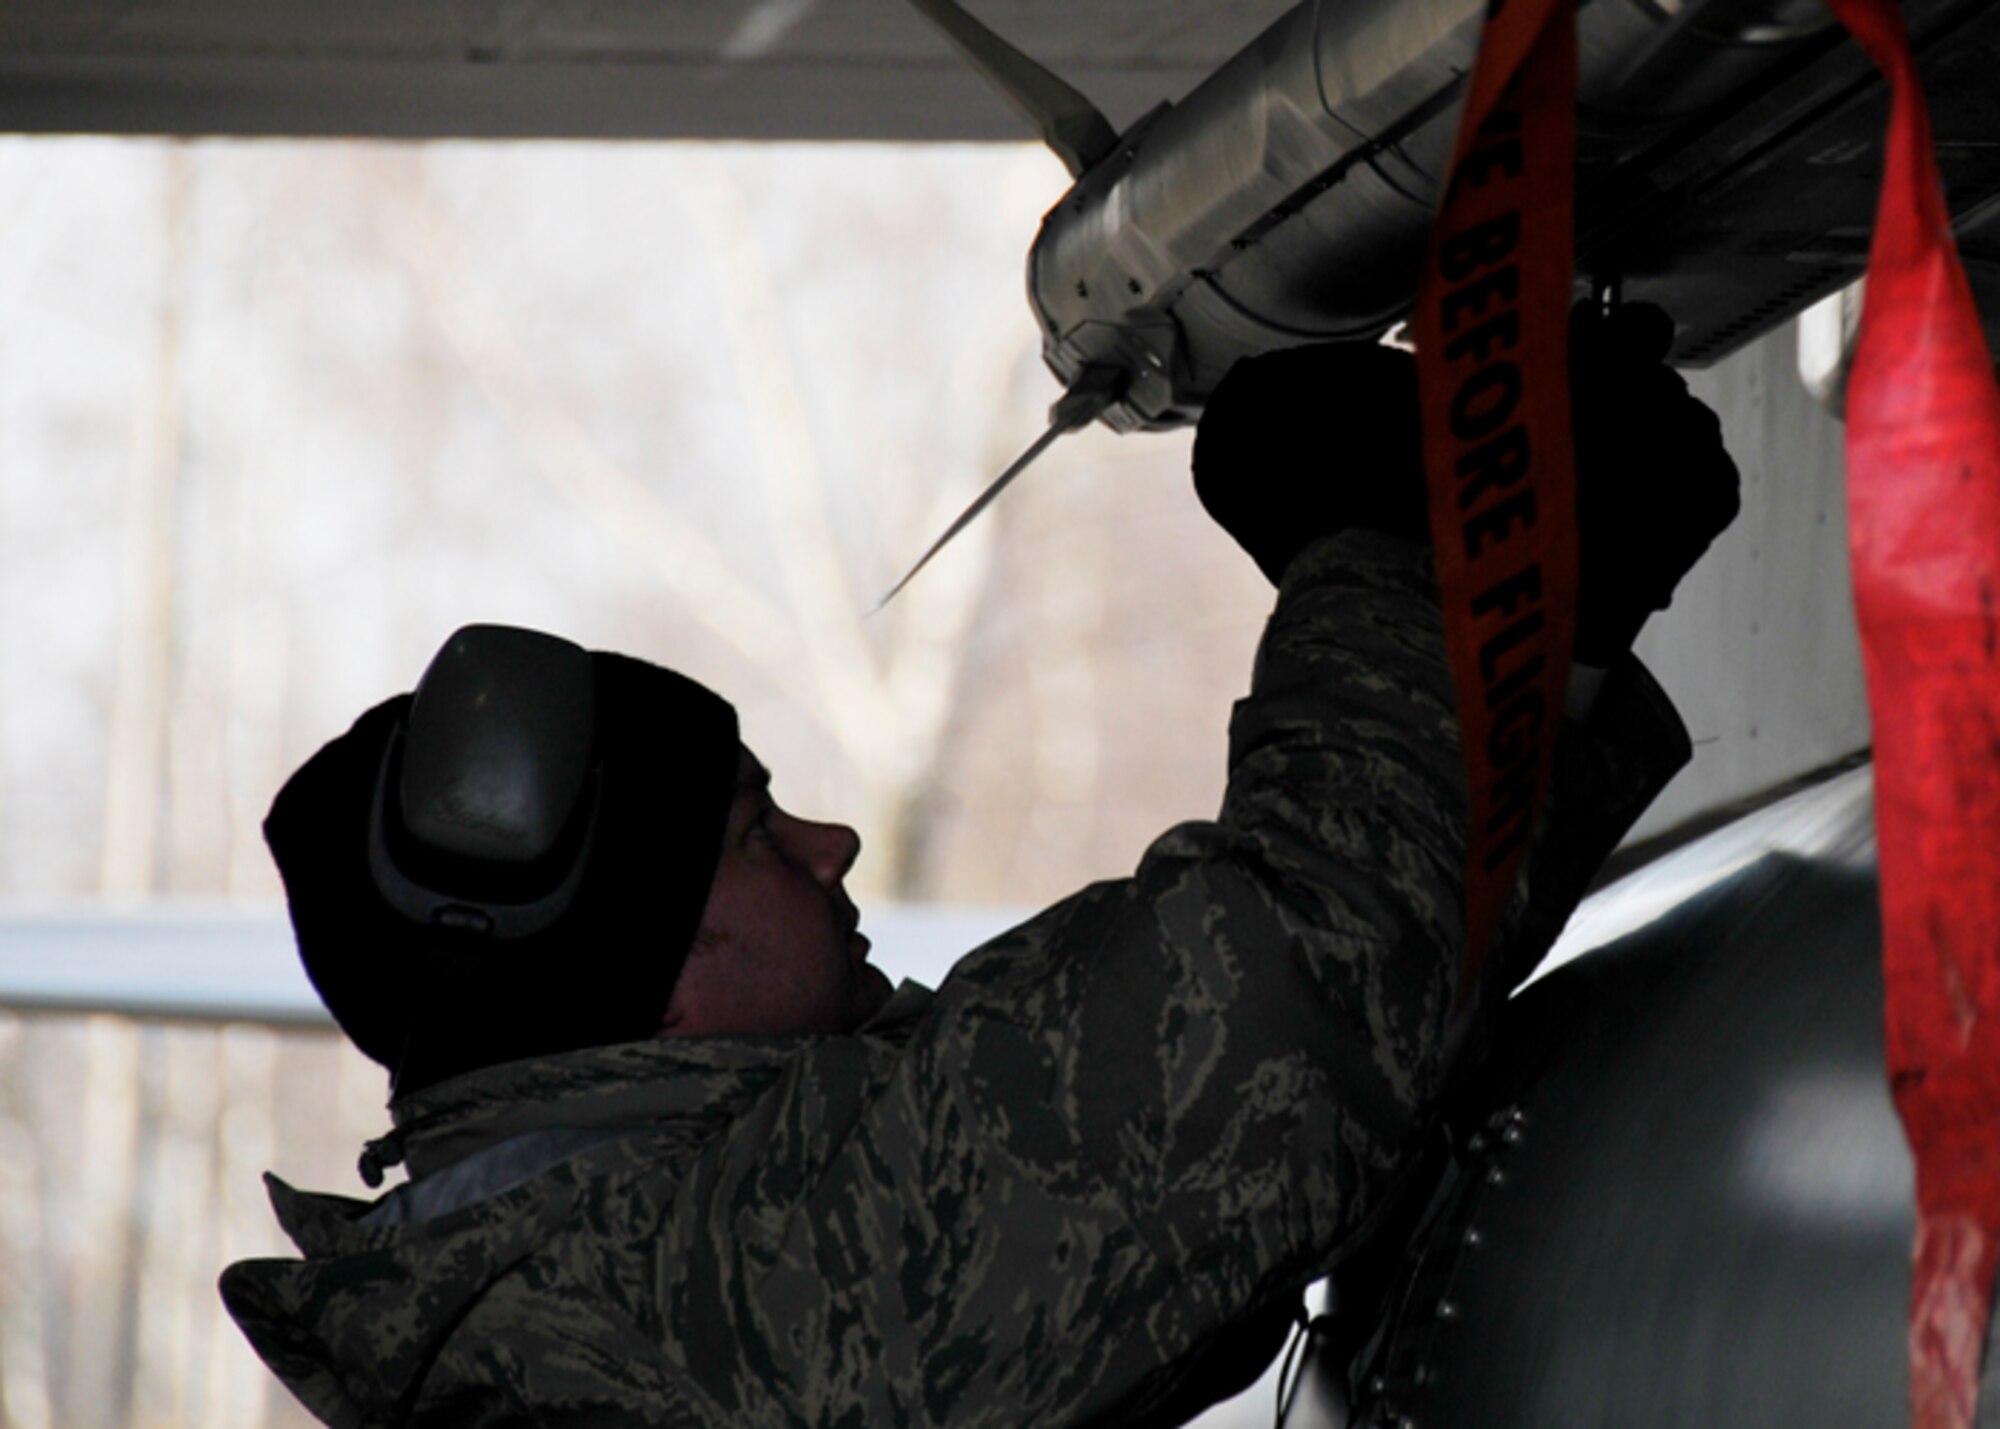 Staff Sgt. Kristopher Glenn, 493rd Expeditionary Fighter Squadron weapons loader, inspects the missiles on an F-15 Eagle after landing in Siauliai, Lithuania, Nov. 11. Sergeant Glenn ensures the weapons are secured to the aircraft and makes any necessary adjustments due to movement in flight.